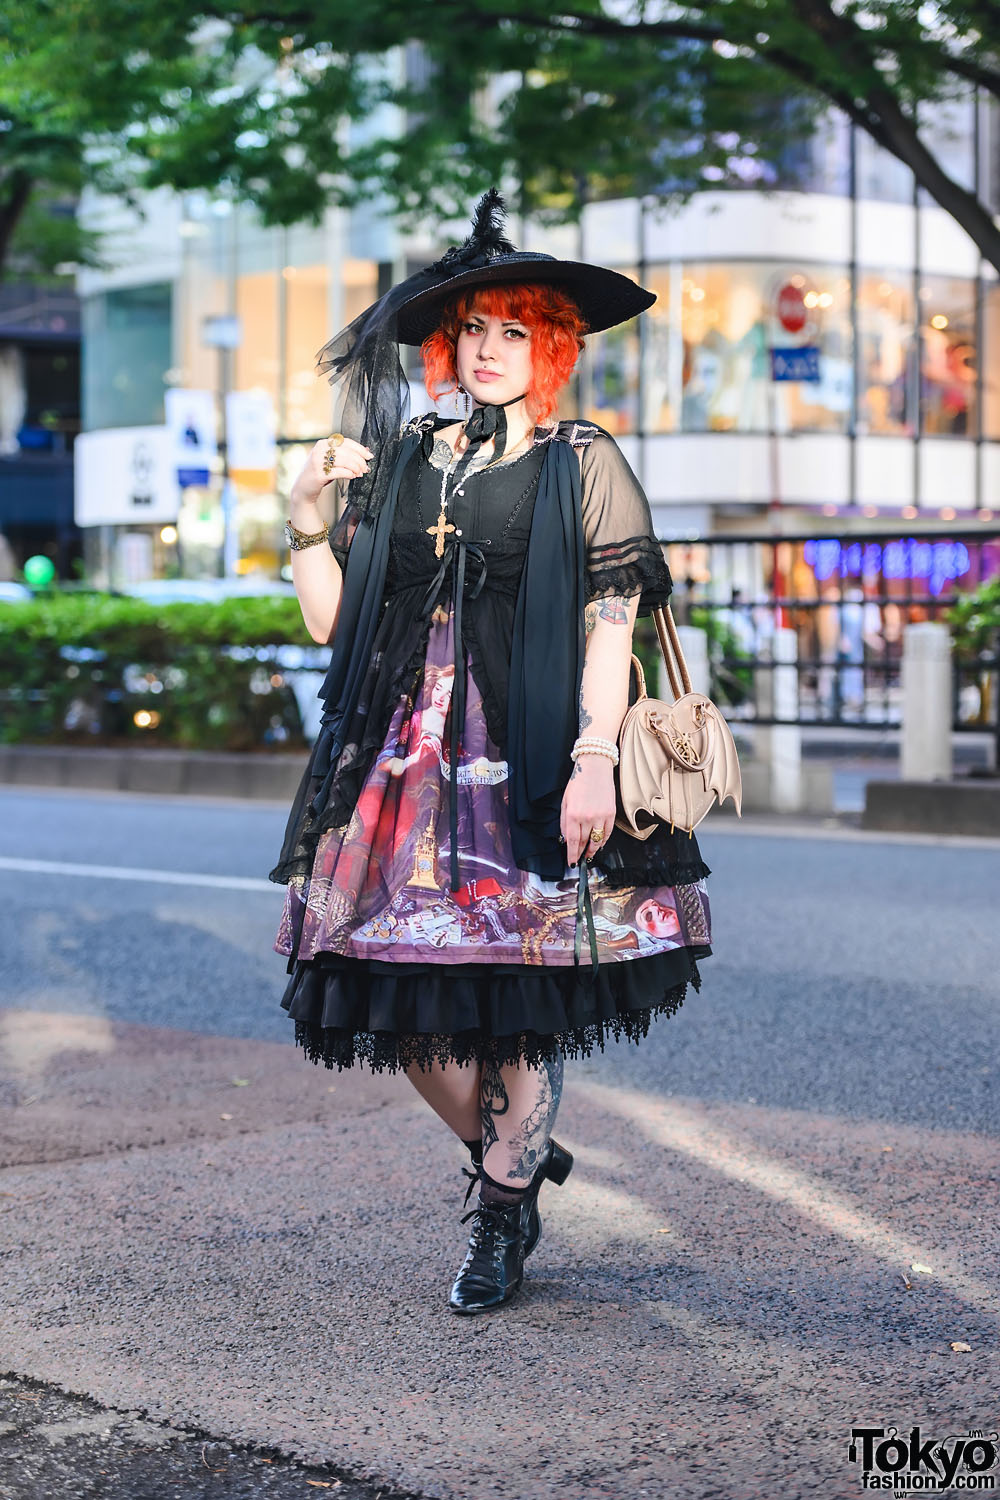 Brazilian Tattoo Artist in Gothic Harajuku Street Style w/ Medusa Piercing, Cameo Jewelry, Graphic Dress, Alice and the Pirates, Angelic Pretty, Winged Heart Bag & Boots